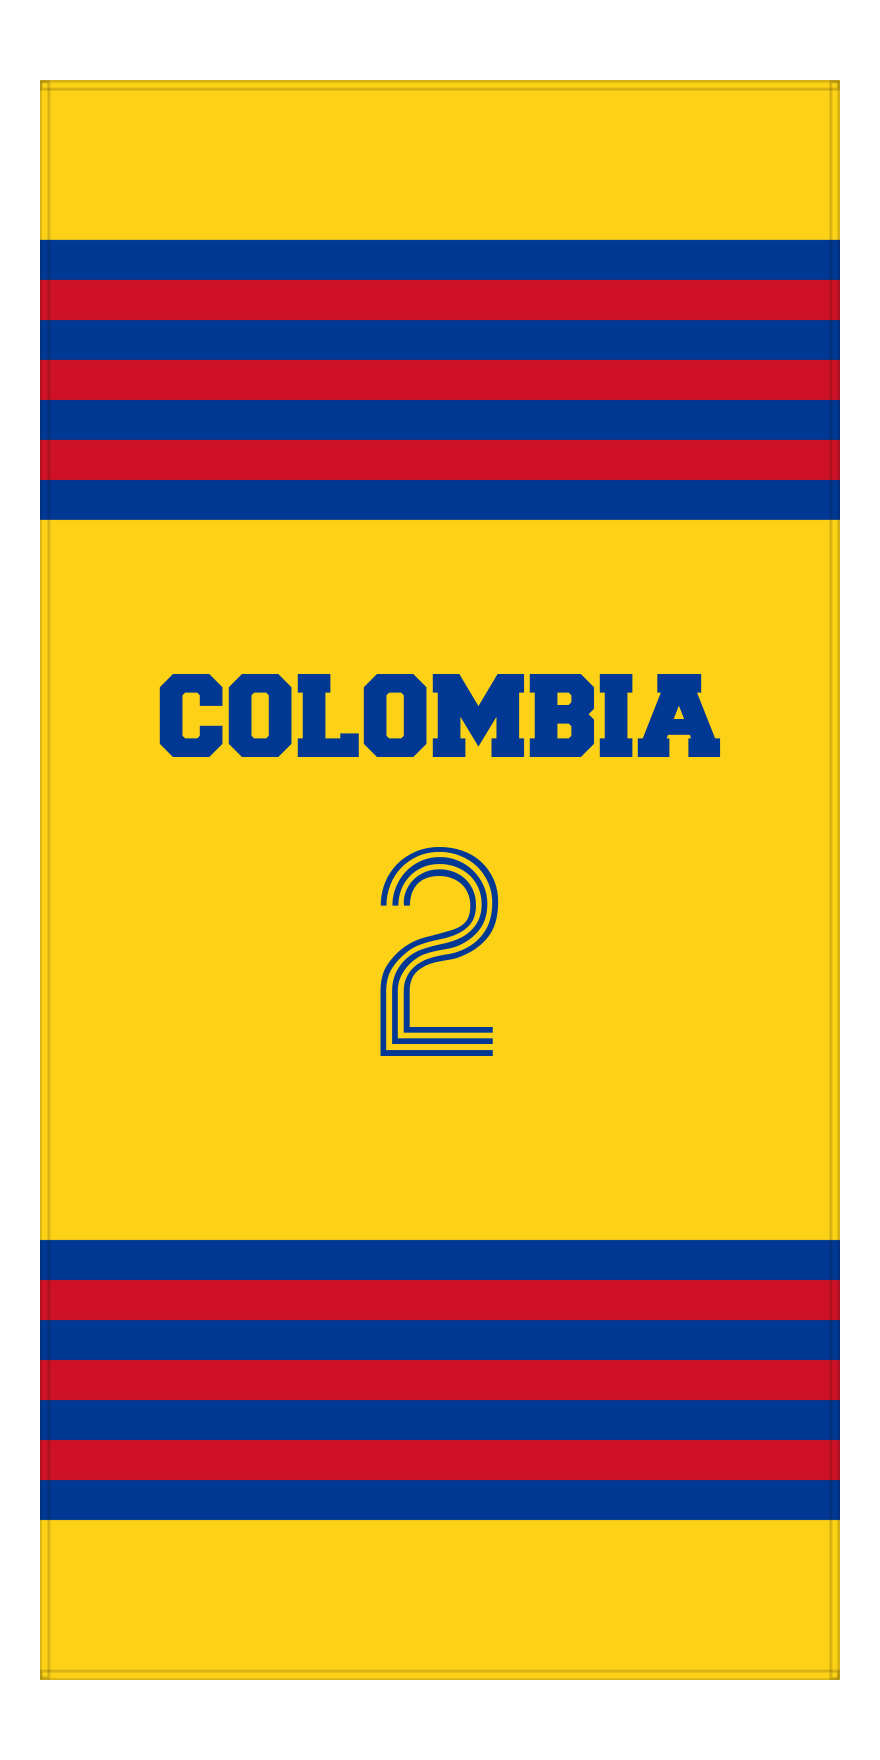 Personalized Jersey Number 3-on-1 Stripes Sports Beach Towel - Colombia - Vertical Design - Front View